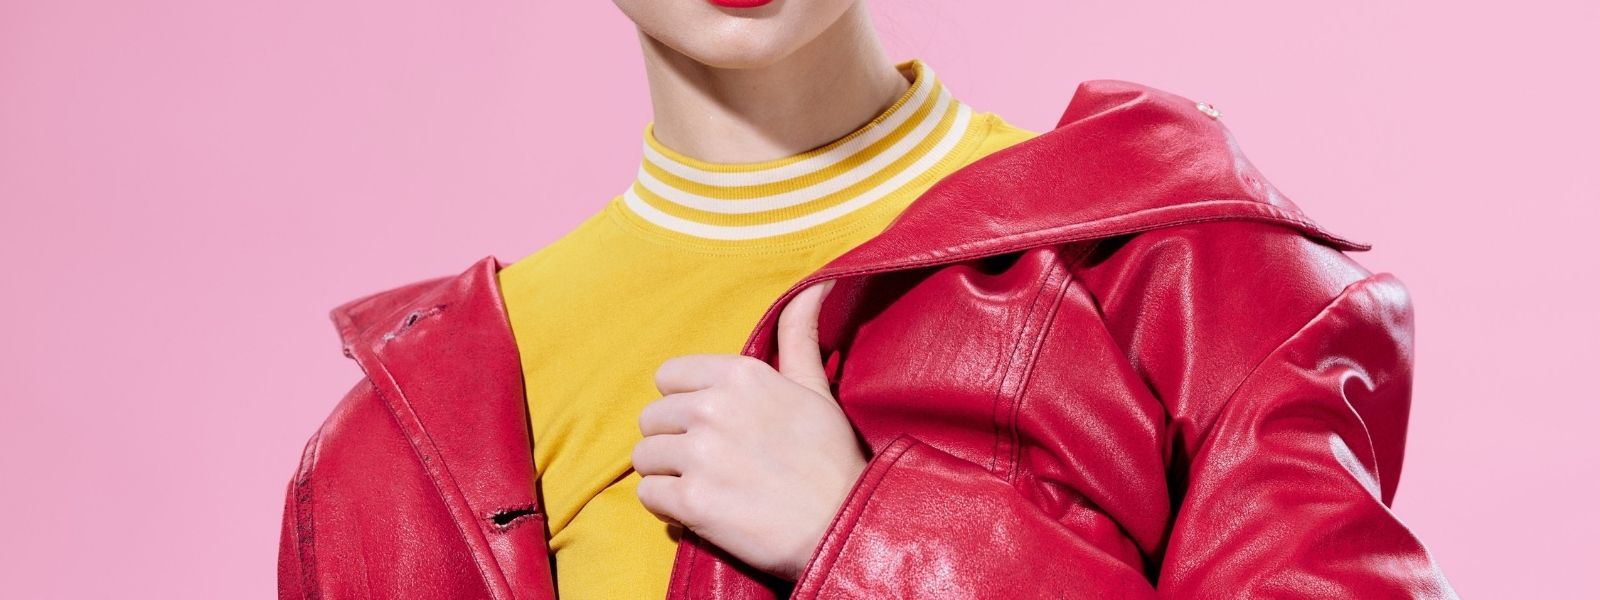 Vegan leather vs real leather: which is more sustainable?